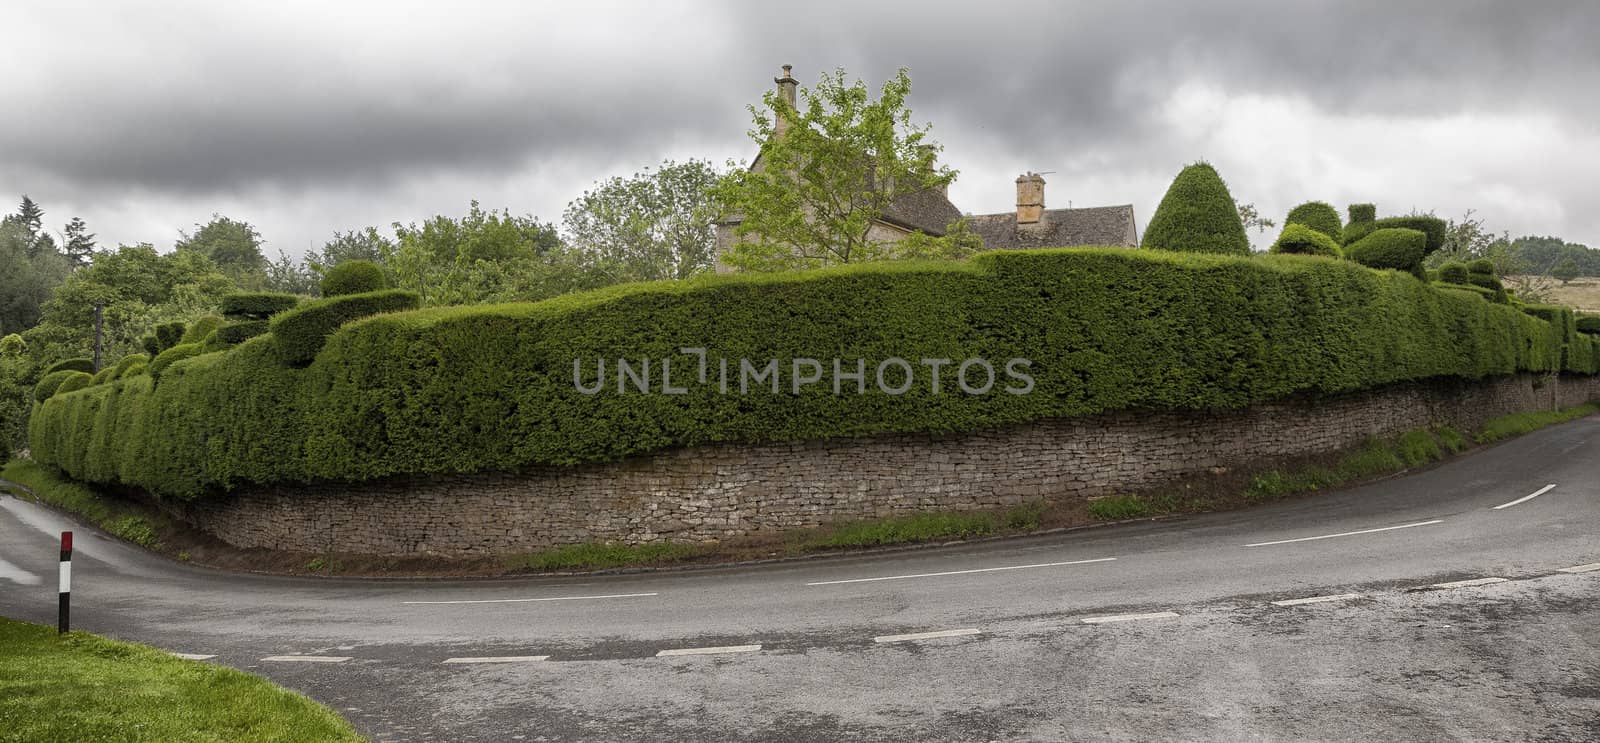 Old beautiful cut hedge by ABCDK